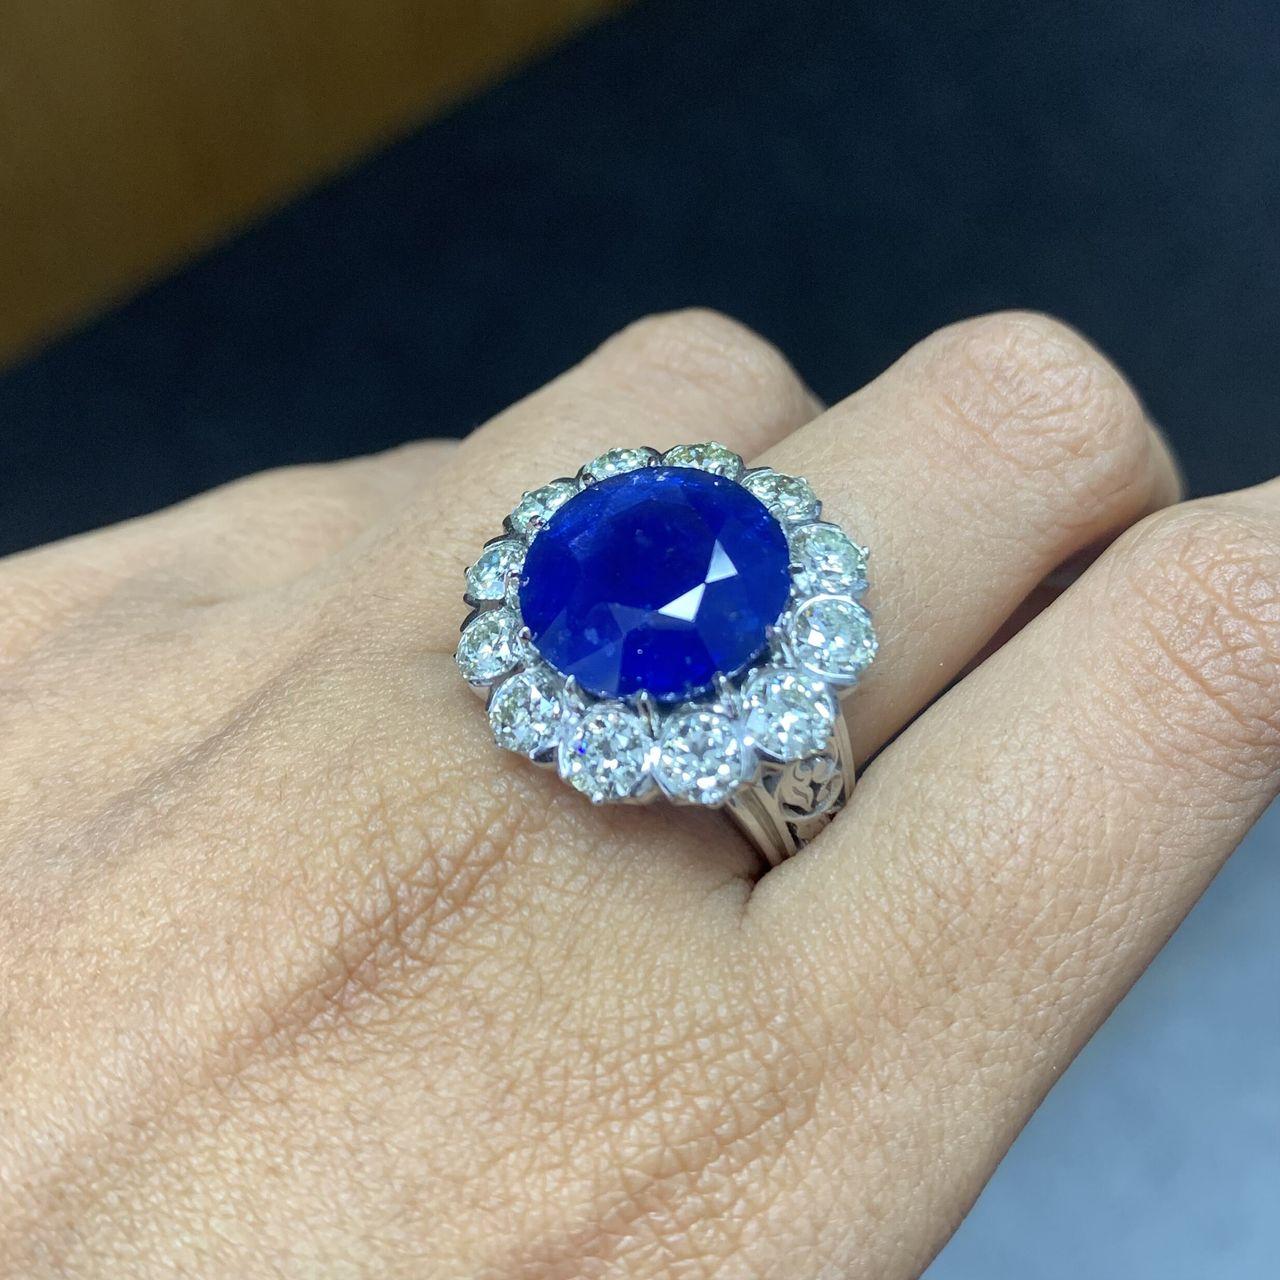 Behold the extraordinary 10.60 Carat Ceylon Sapphire Ring, adorned with the timeless charm of Old Mine Cut Diamonds, all set in the opulence of Platinum 900. The centerpiece of this exquisite ring is a stunning 10.60-carat cornflower blue Ceylon